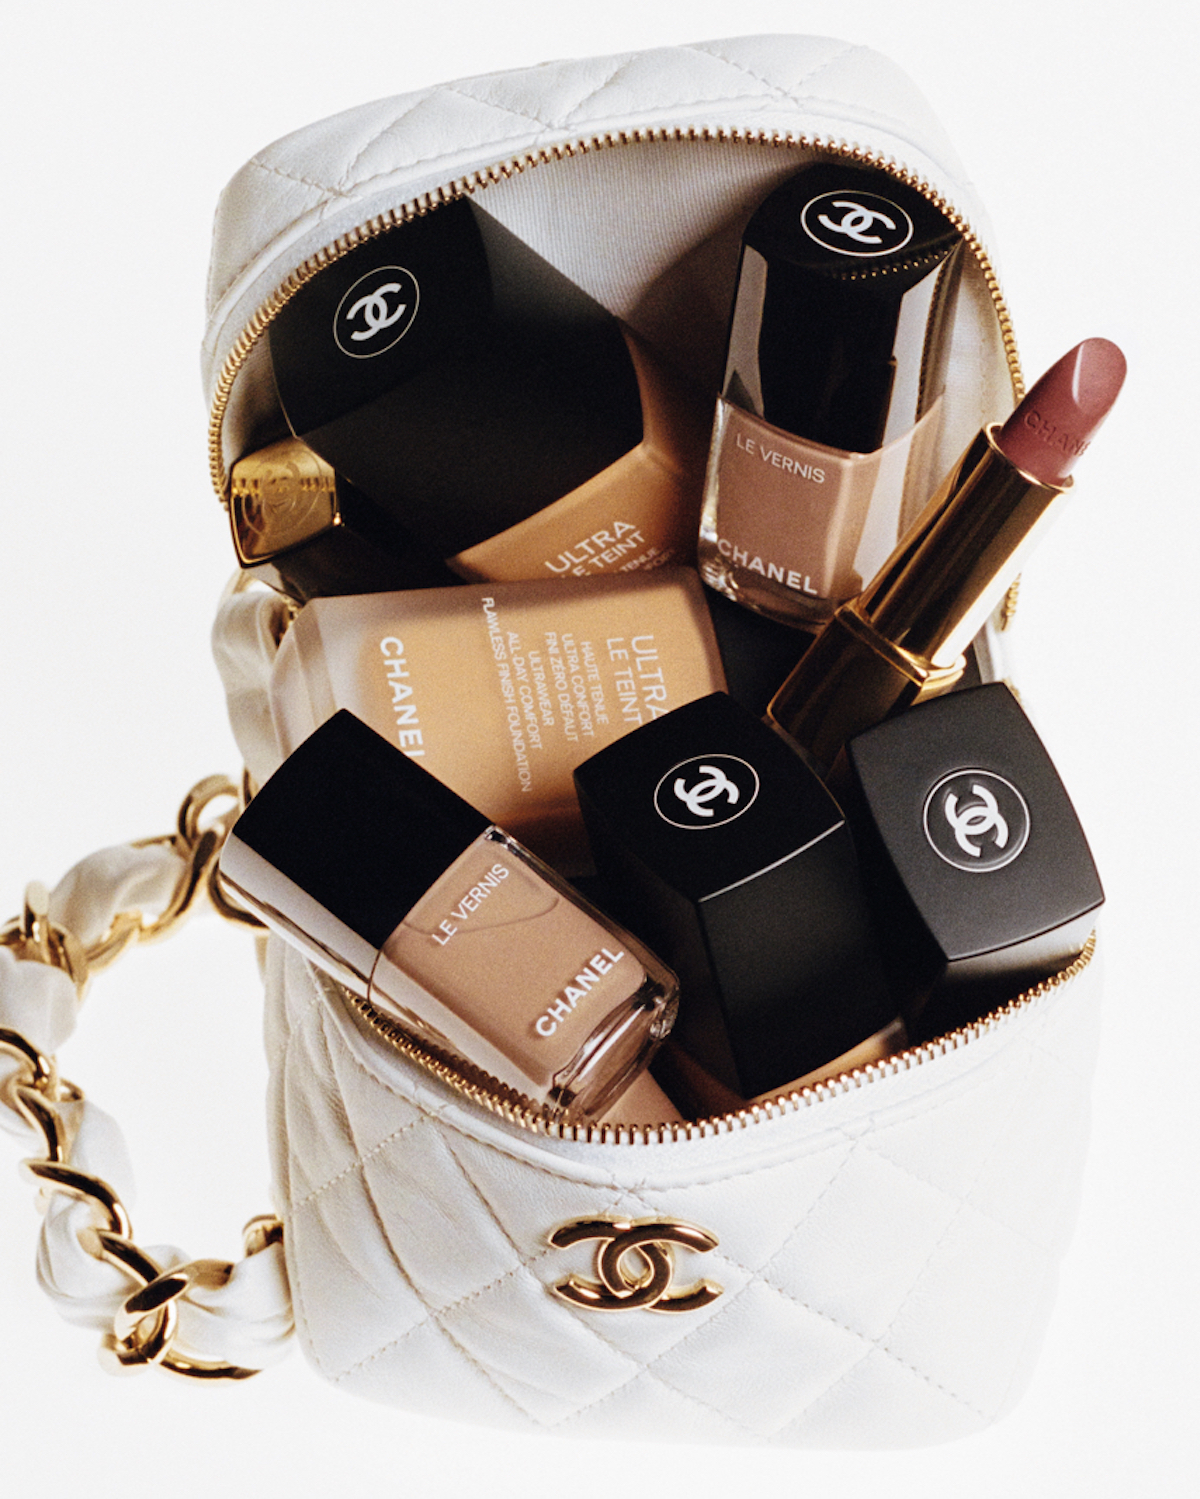 Refresh Your Look with Expert Advice from CHANEL Make-up Artists |